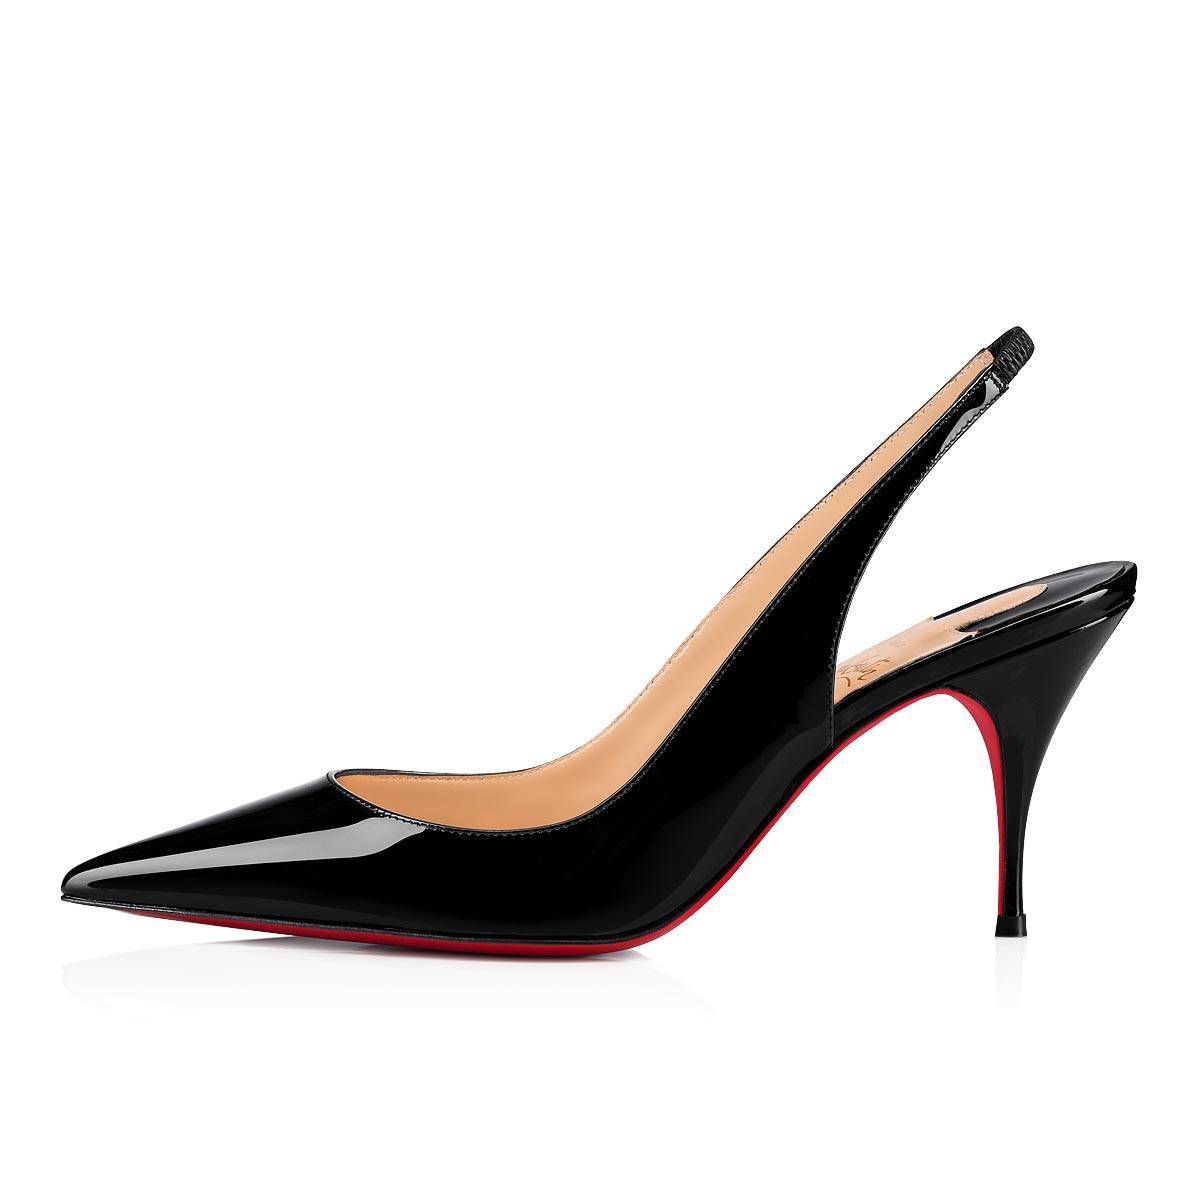 Red Bottoms Pumps Canada - Christian Louboutin Clare Slingback Women's ...